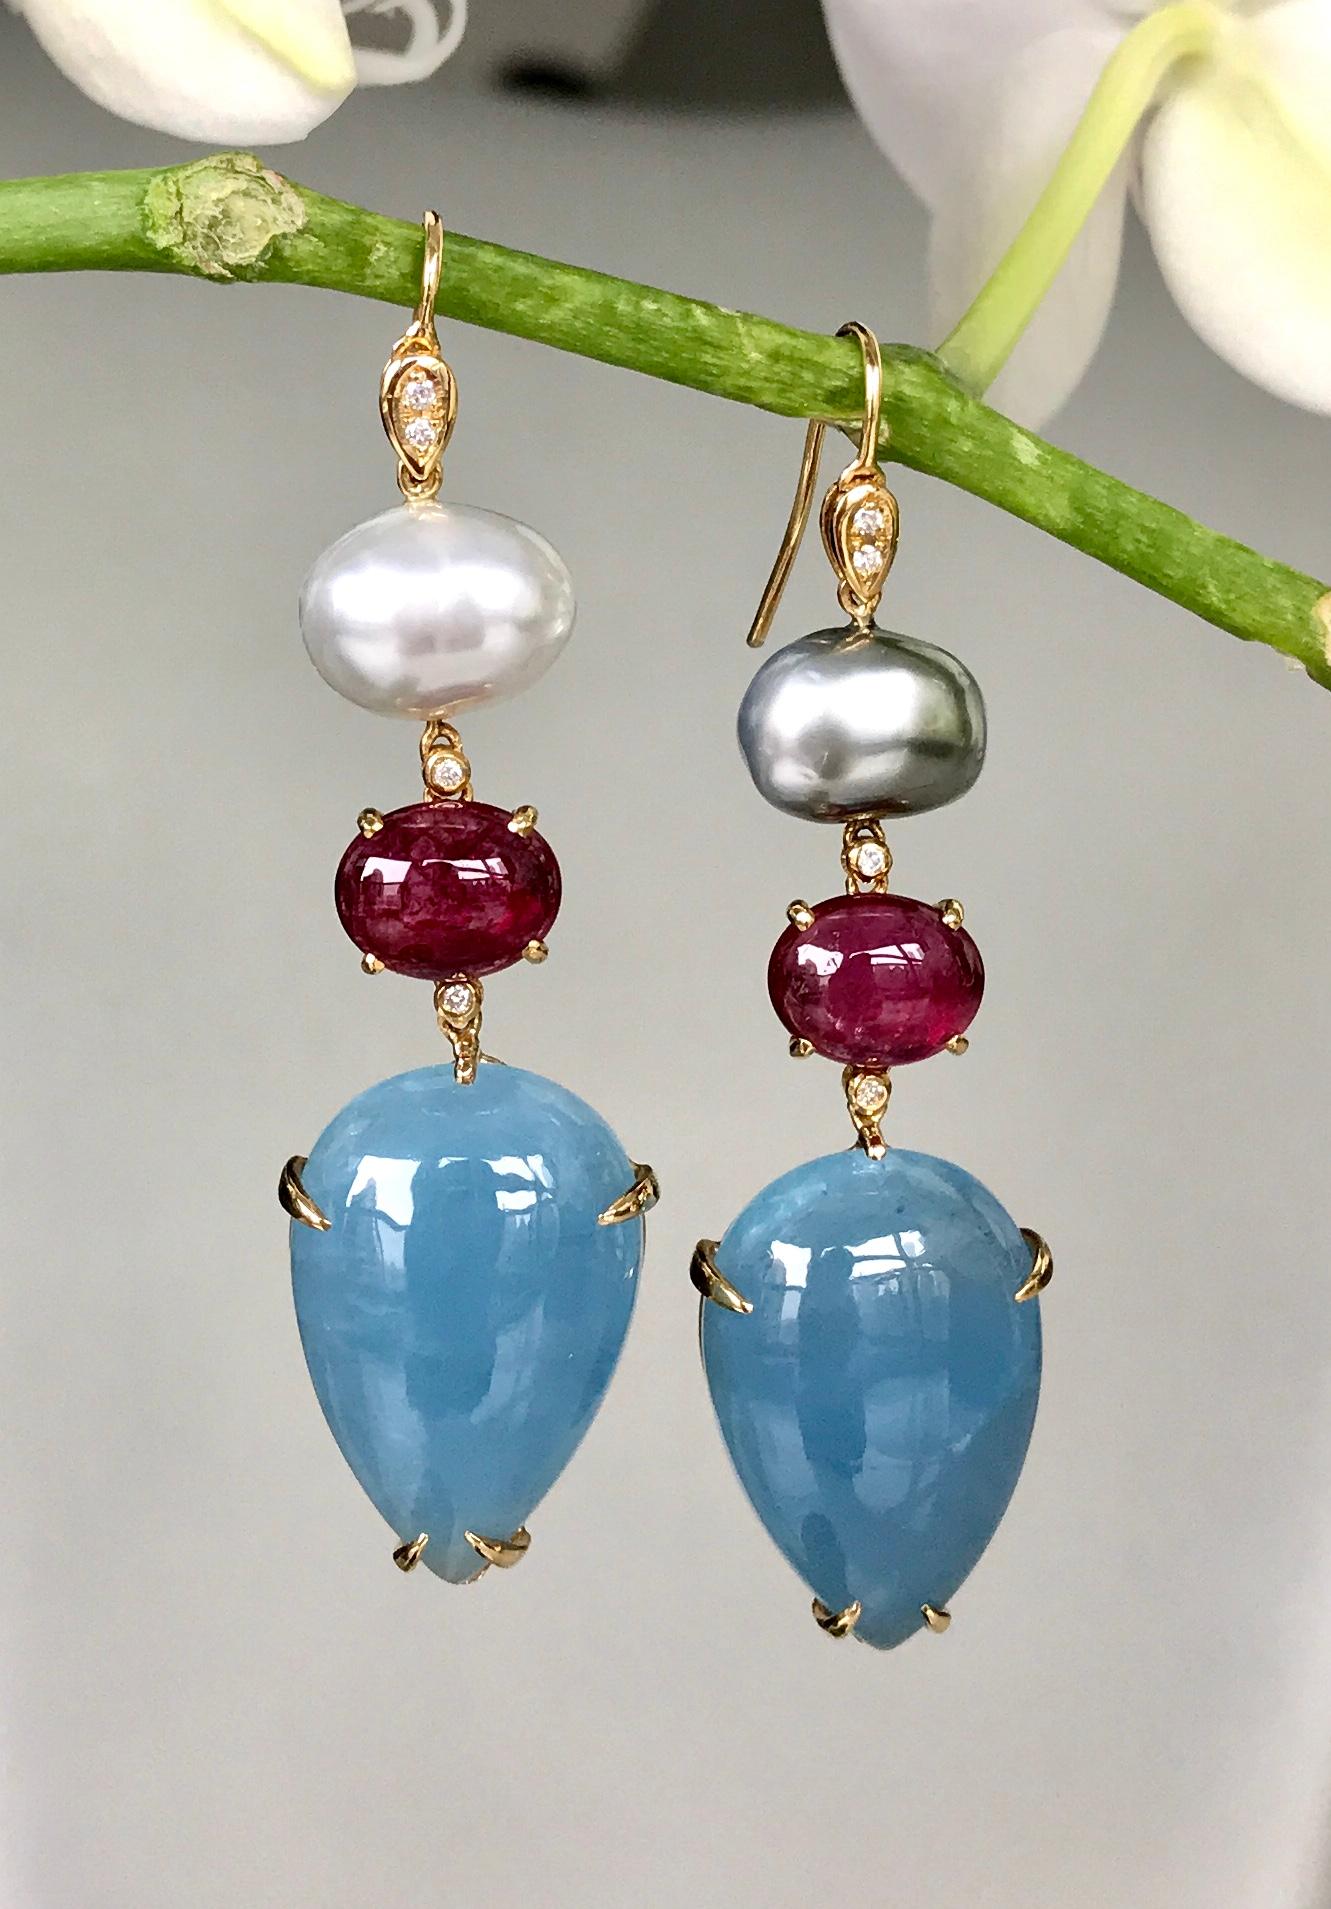 One-of-a-kind dangle earrings of South Sea and Tahitian cream and grey keshi pearls, cabochon rubellite tourmalines, fancy cabochon aquamarine drops, and diamonds, handcrafted in 18 karat yellow gold. 2.5 inches or 63 mm length.

These luminescent